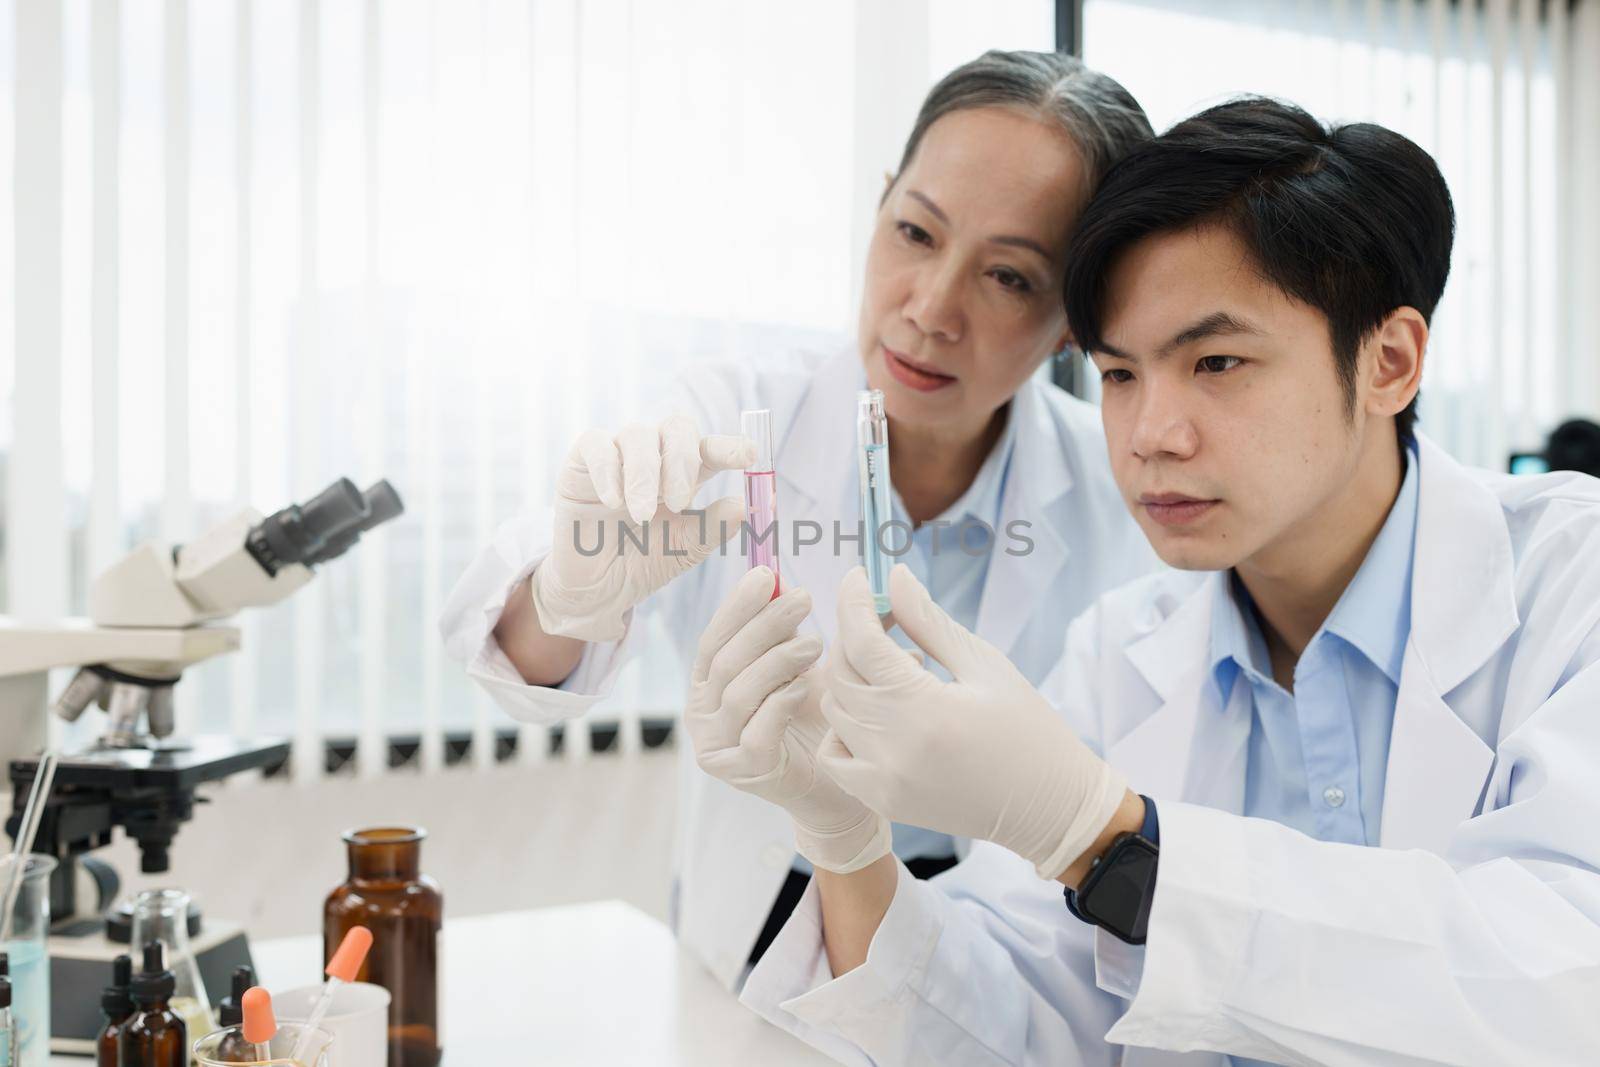 Health care researchers working in life of medical science laboratory by itchaznong